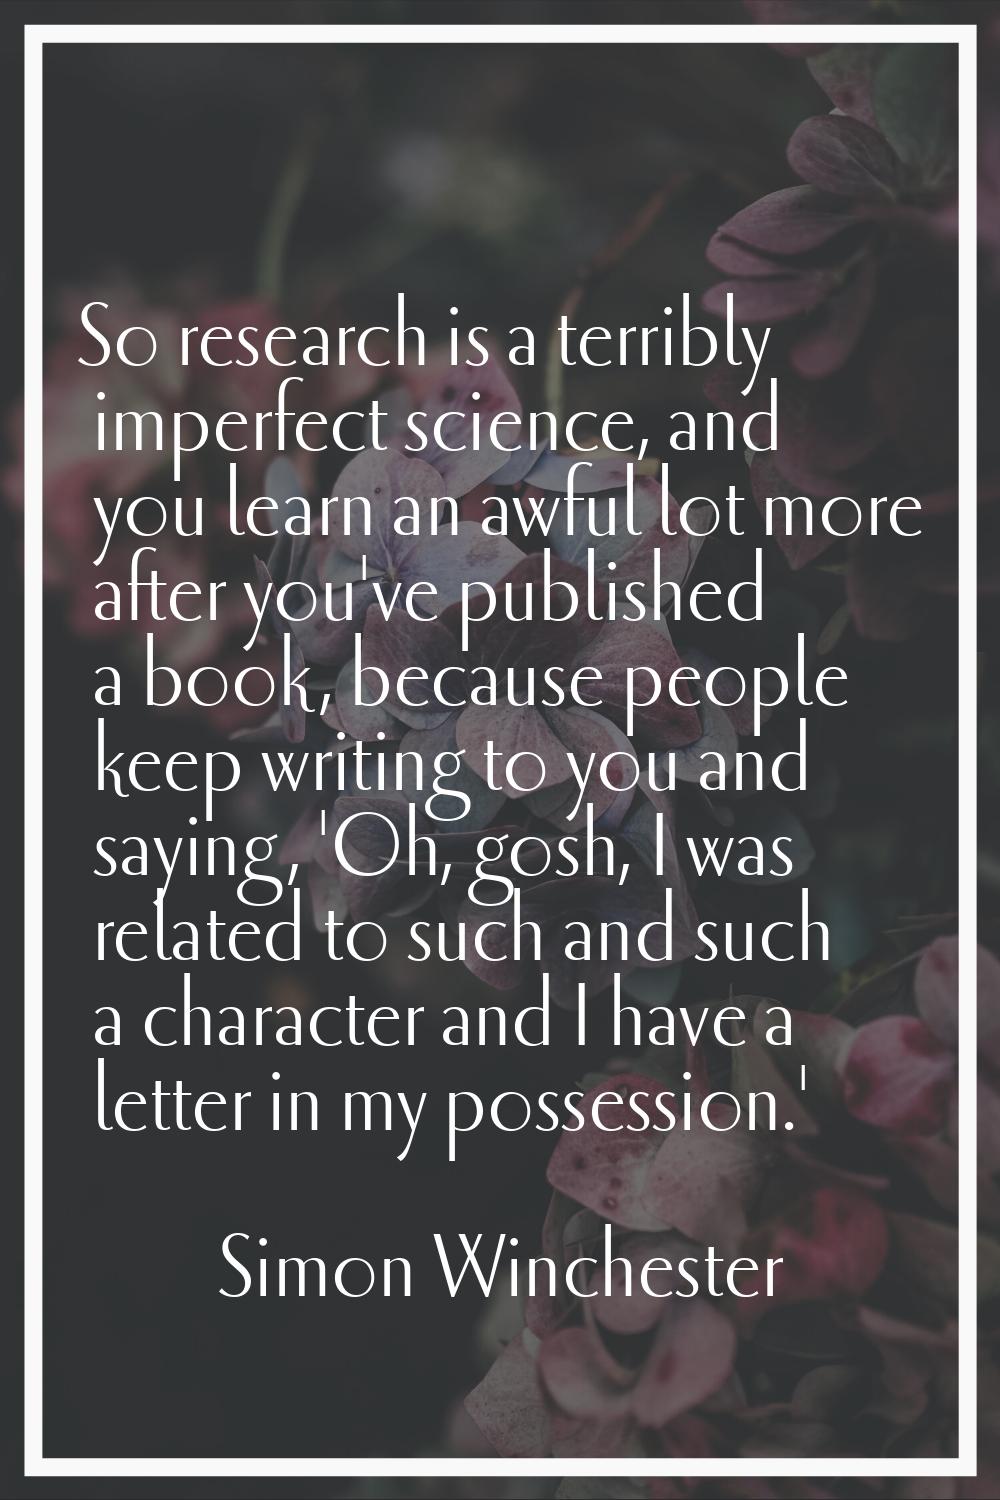 So research is a terribly imperfect science, and you learn an awful lot more after you've published